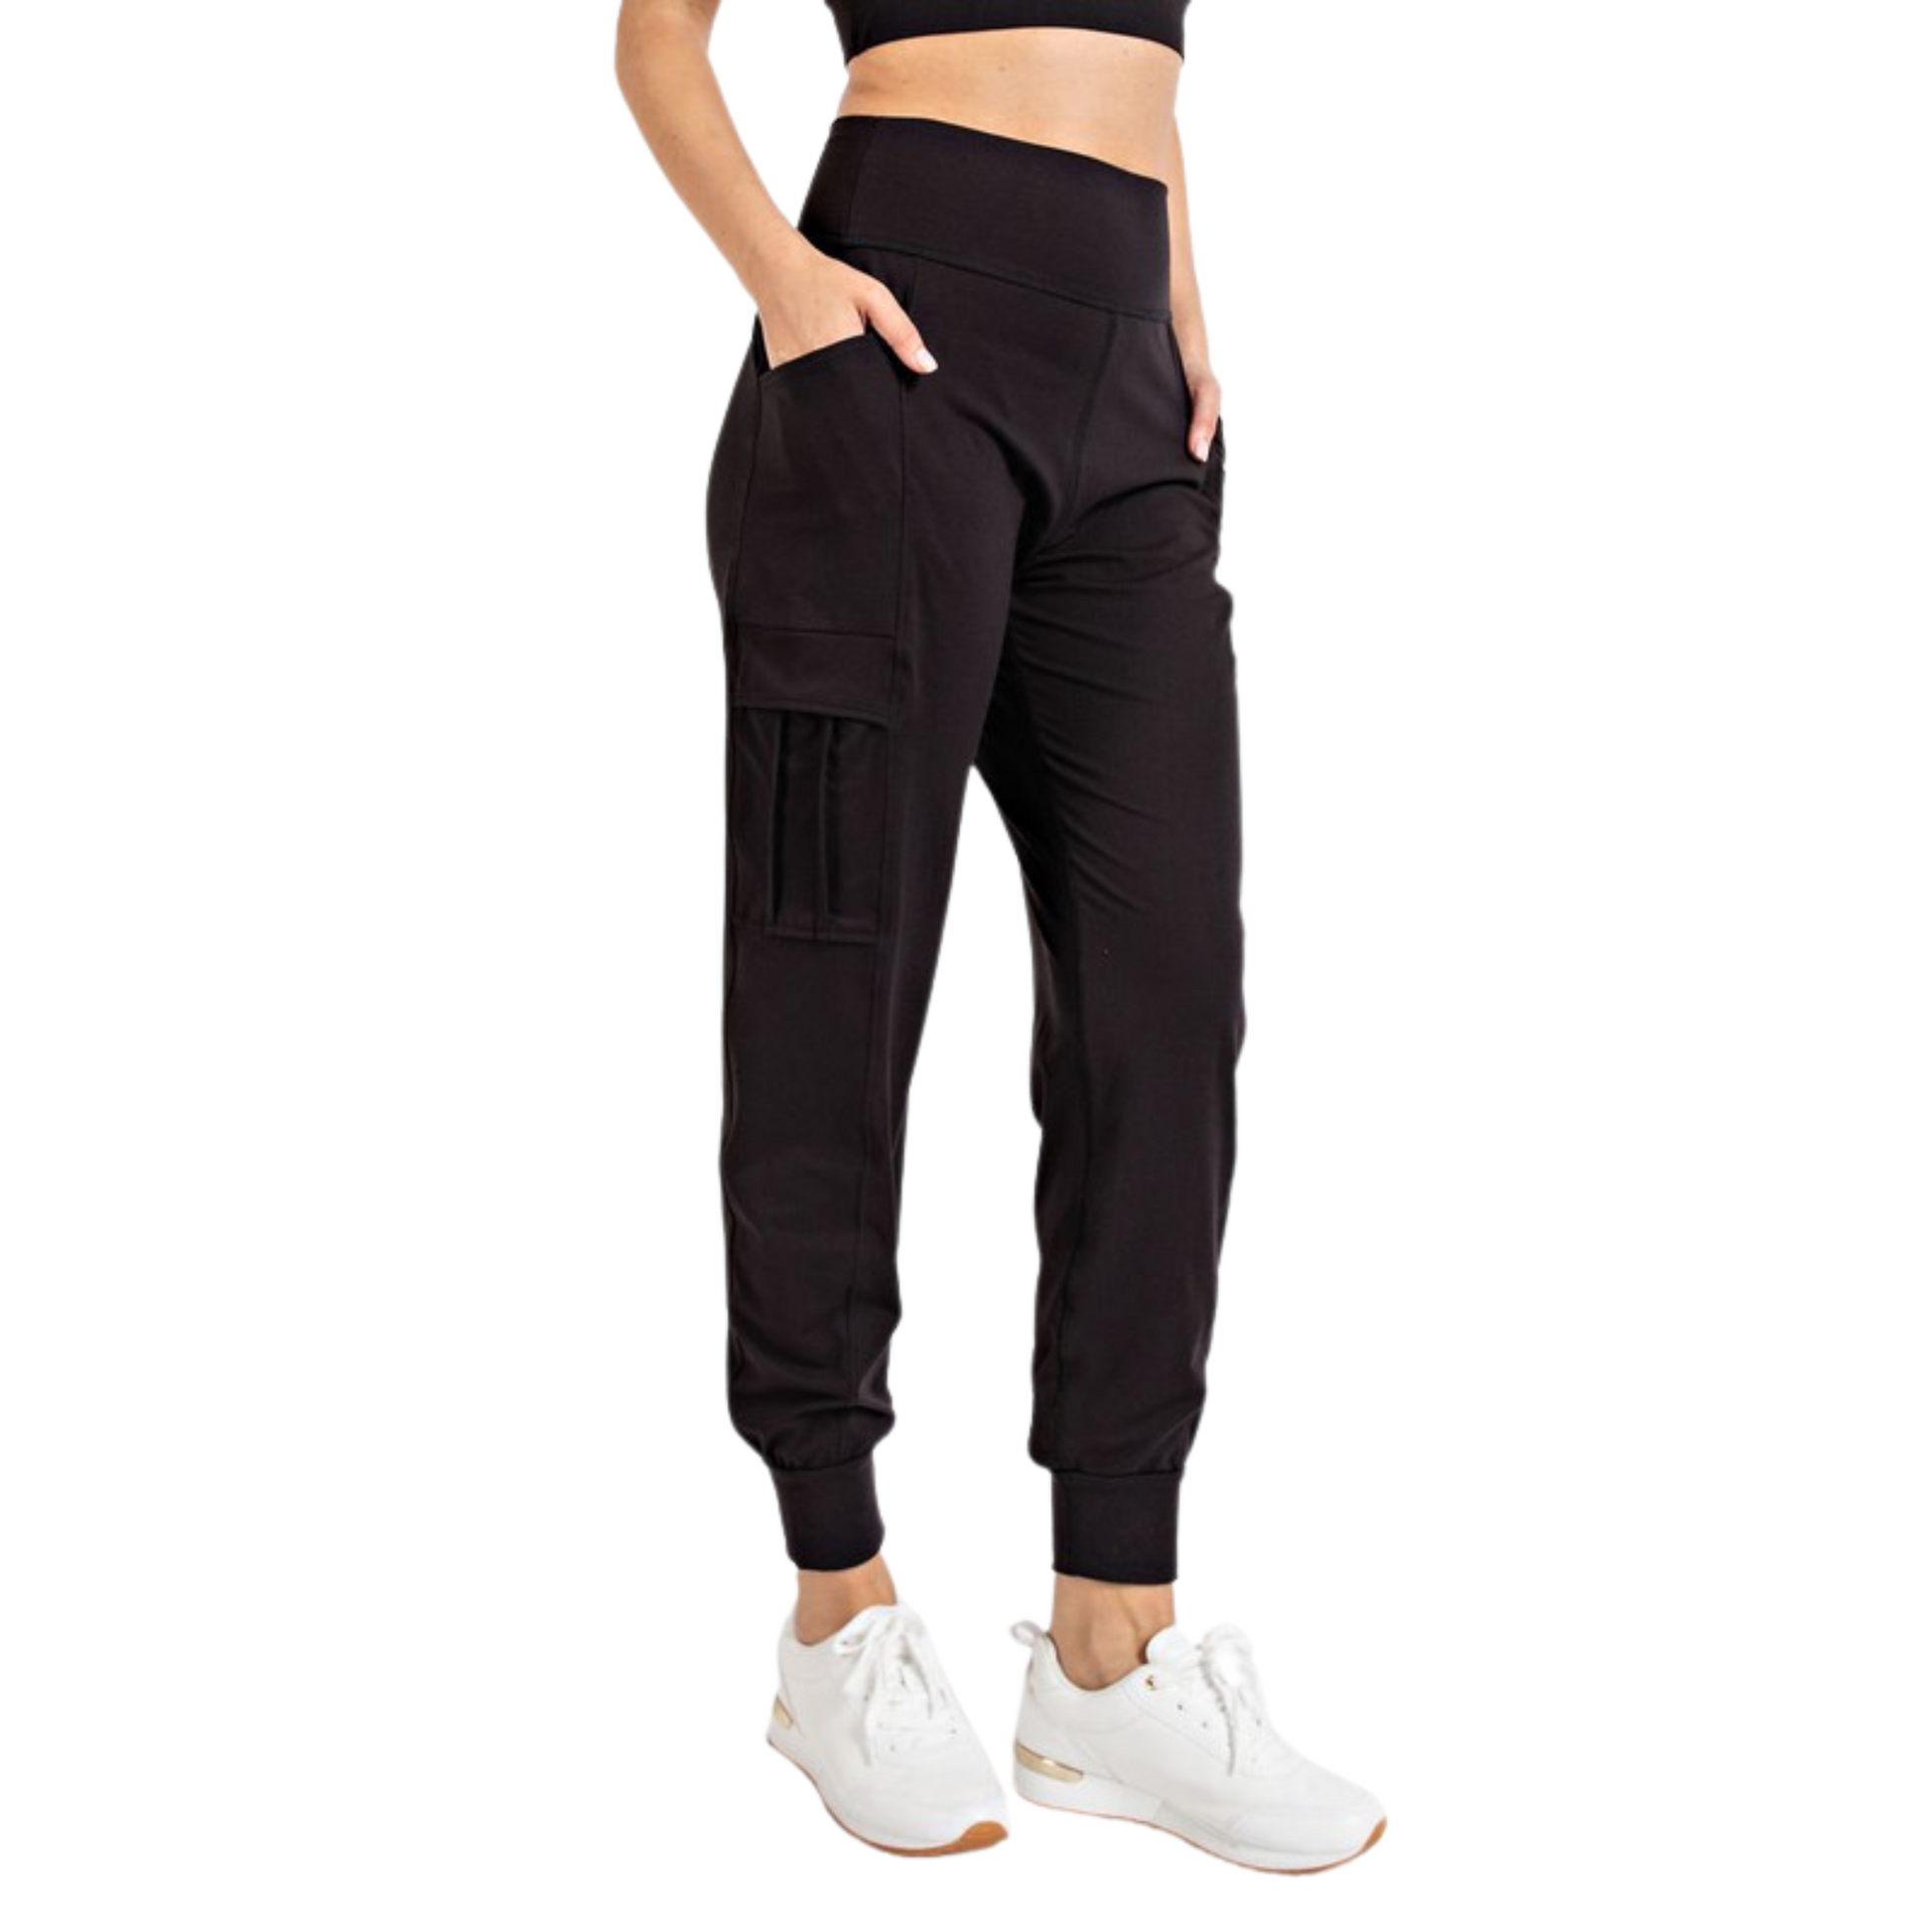 Effortlessly move and store your essentials with these Joggers. Made with our signature butter soft fabric and a waist band for ultimate comfort. Stay organized with side and cargo pockets, while the pintuck and bottom band add a touch of style. Available in black.